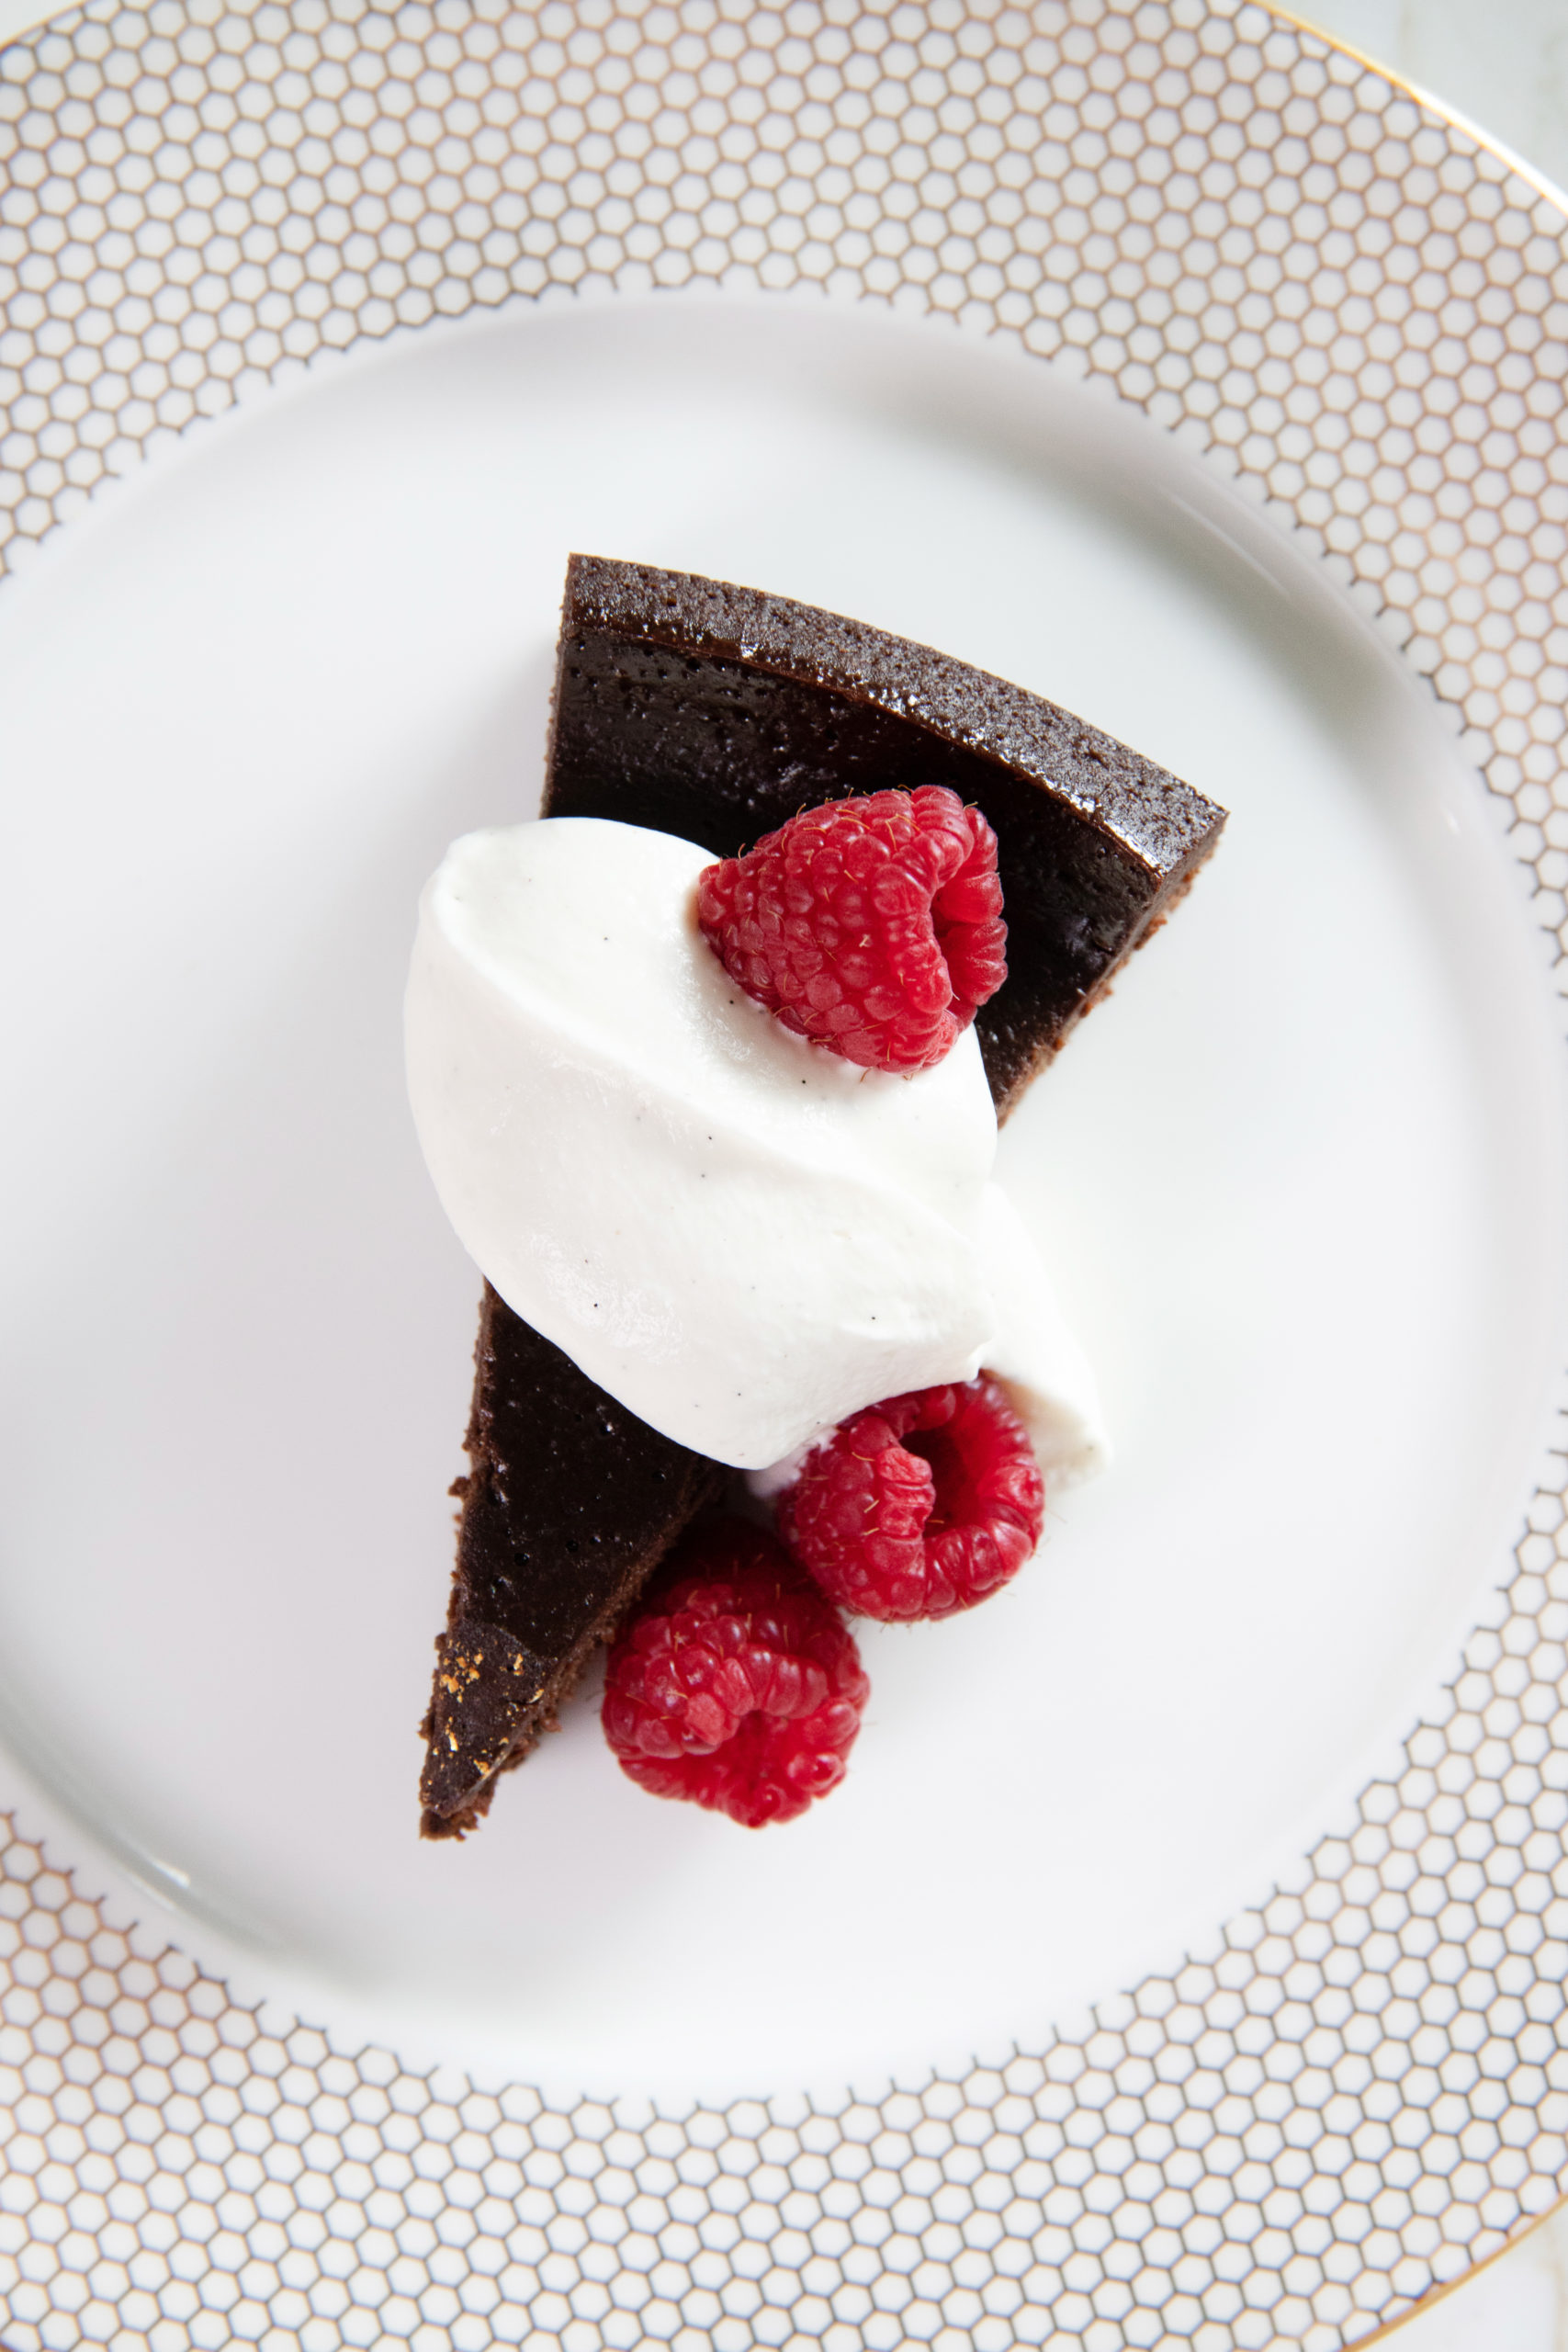 image of flourless chocolate cake plated with raspberries